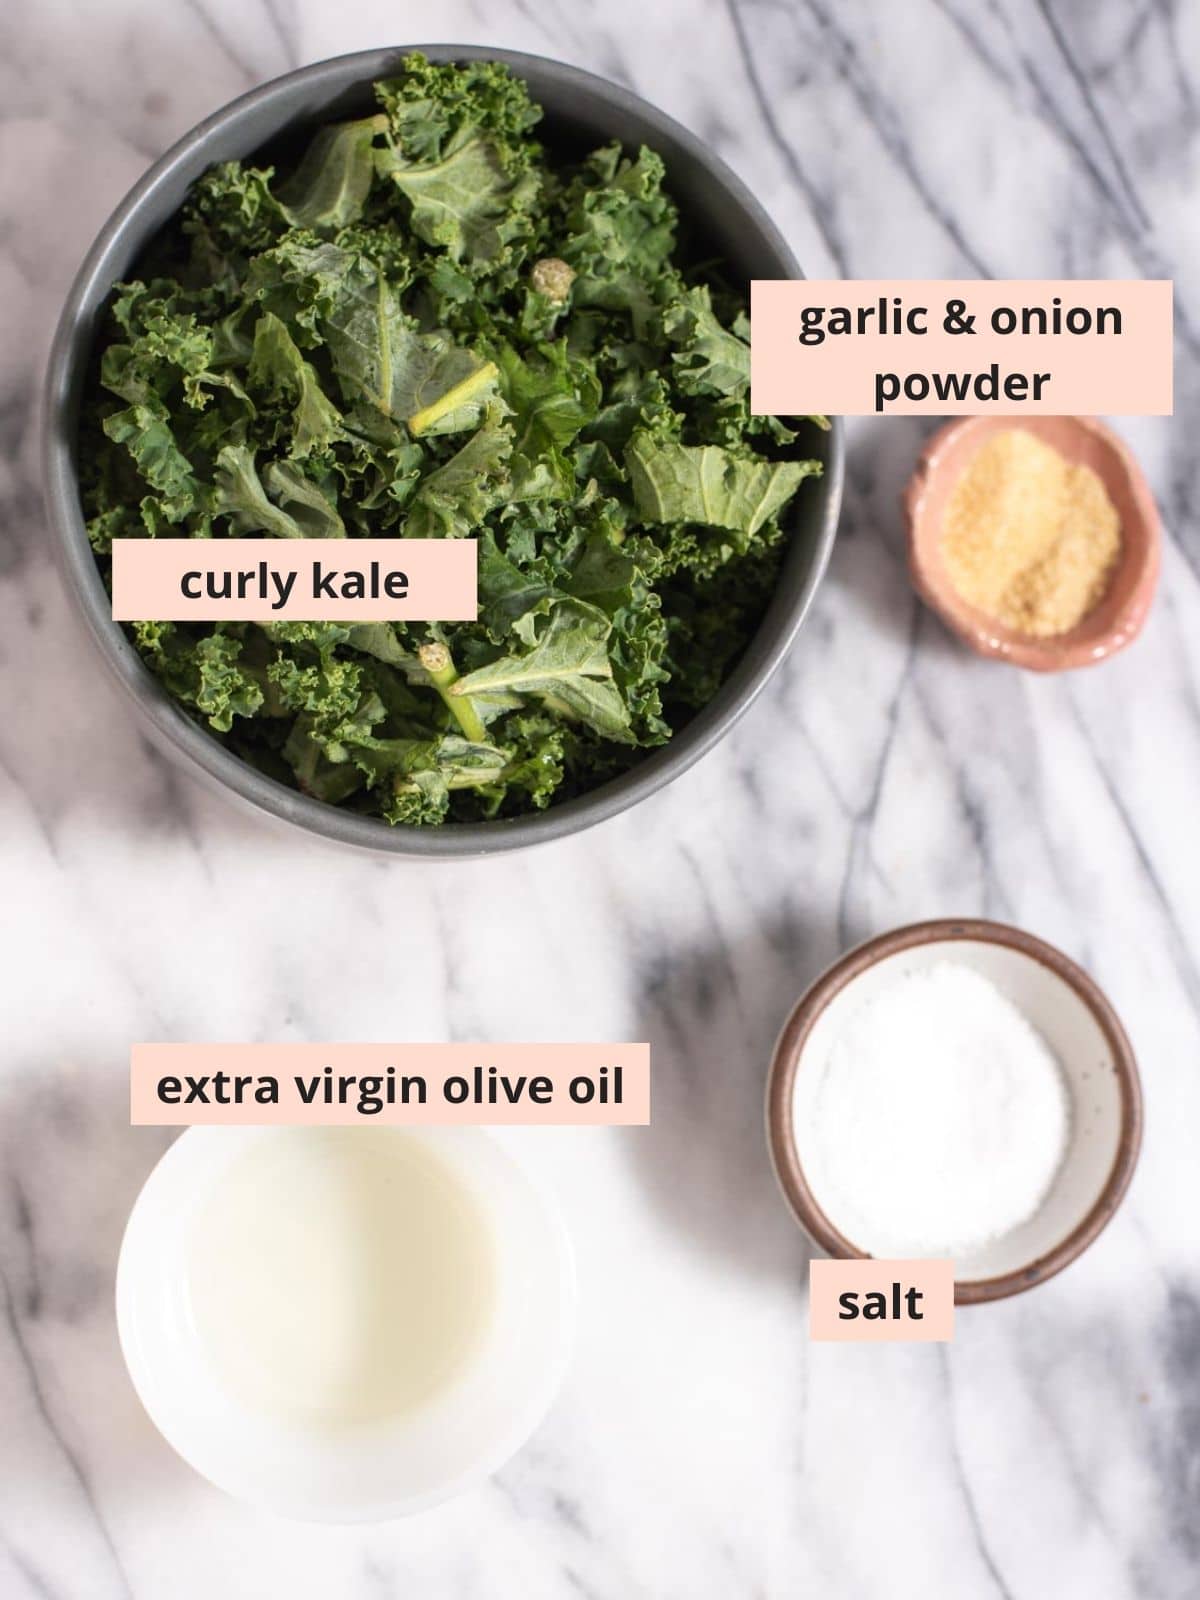 Labeled ingredients used to make kale chips.